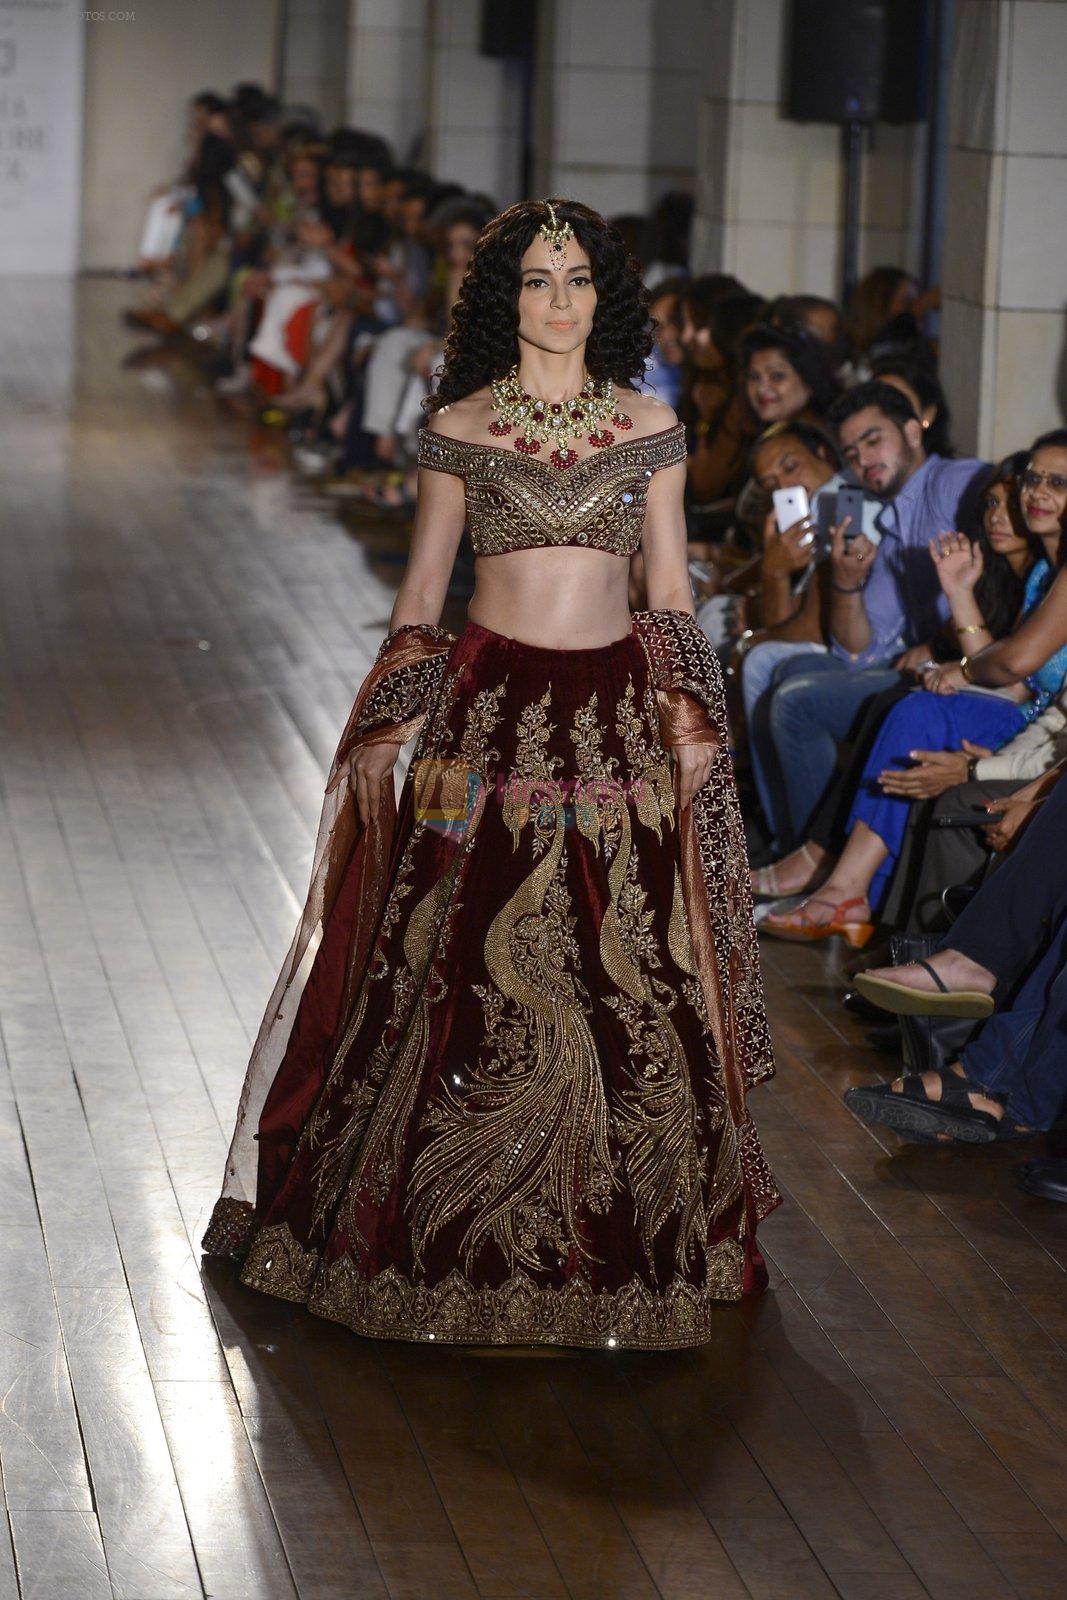 Kangana Ranaut walks for Manav Gangwani latest collection Begum-e-Jannat at the FDCI India Couture Week 2016 on 24 July 2016